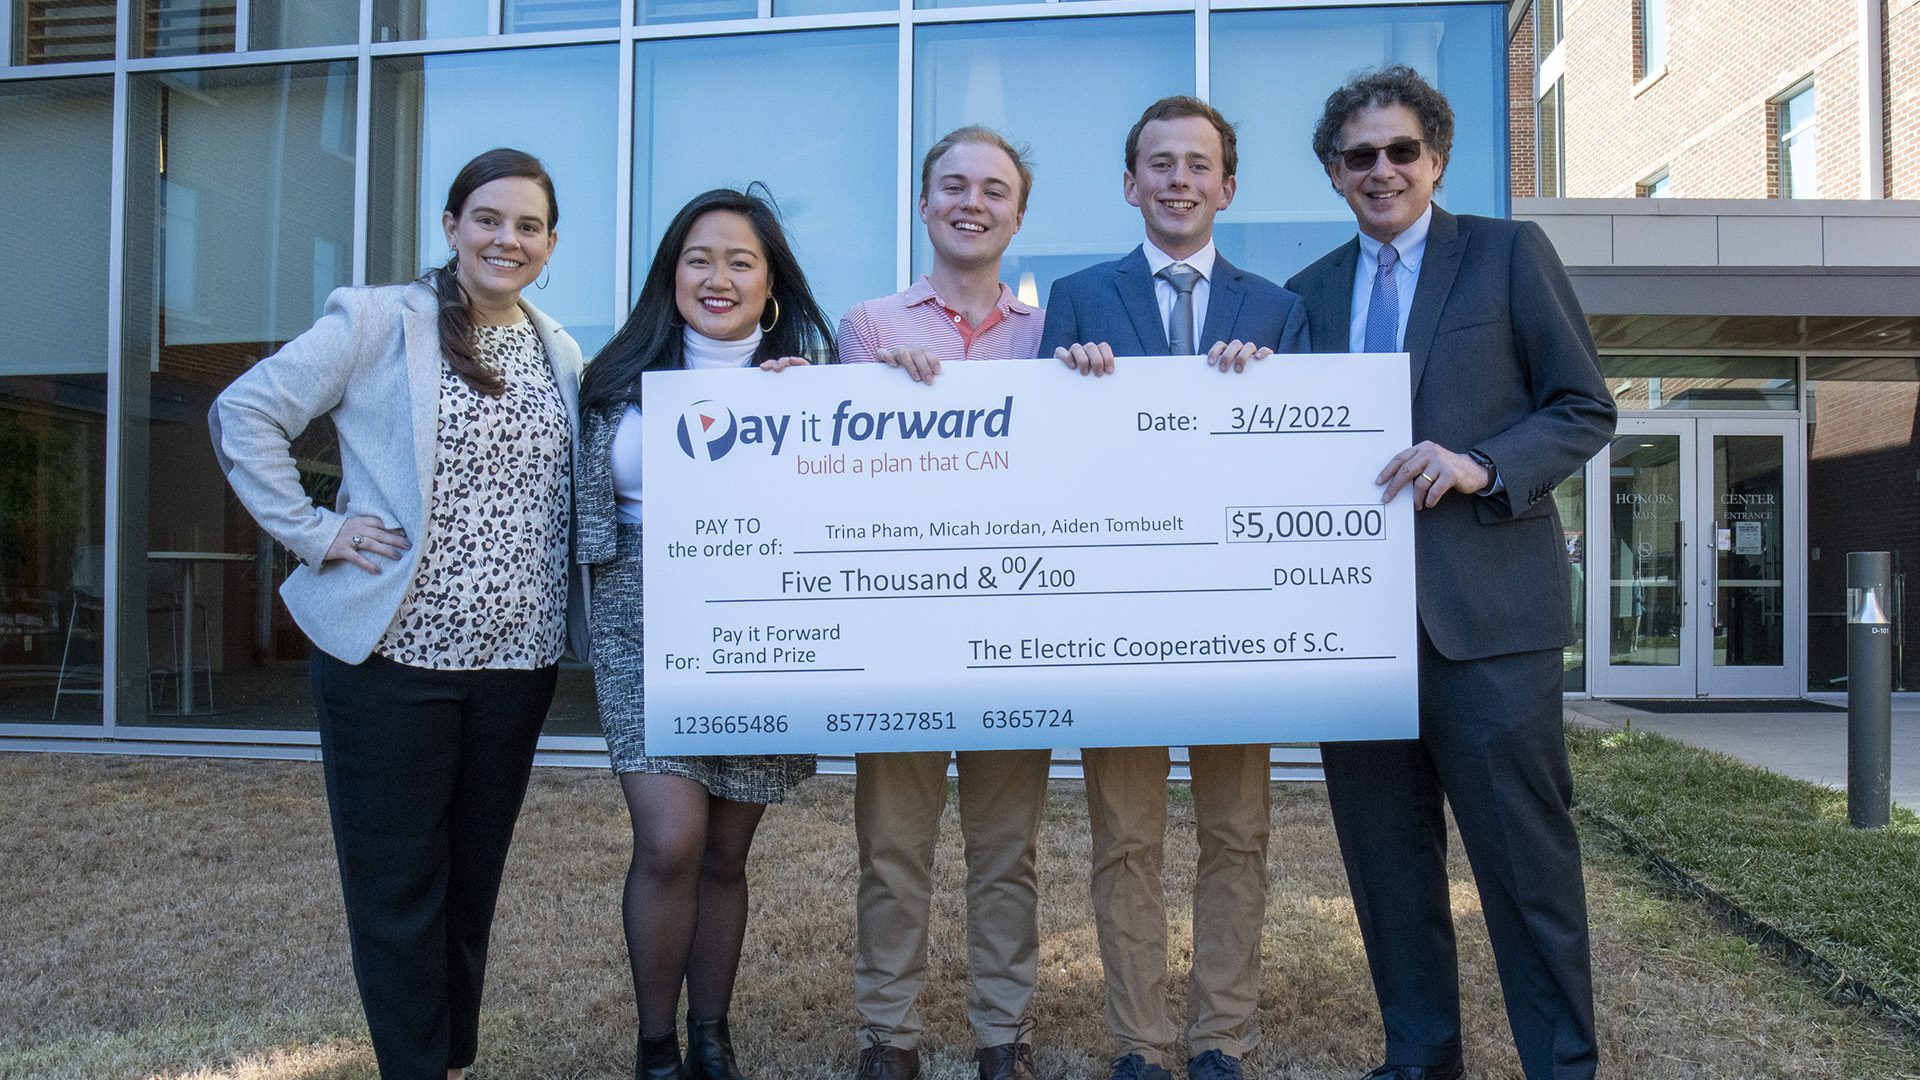 Elizabeth Edwards Martin with Blue Ridge Electric Cooperative presenting the competition award check to Clemson students Trina Pham, Micah Jordan and Aiden Tombuelt, with William Lasser from the Clemson University Honors College.